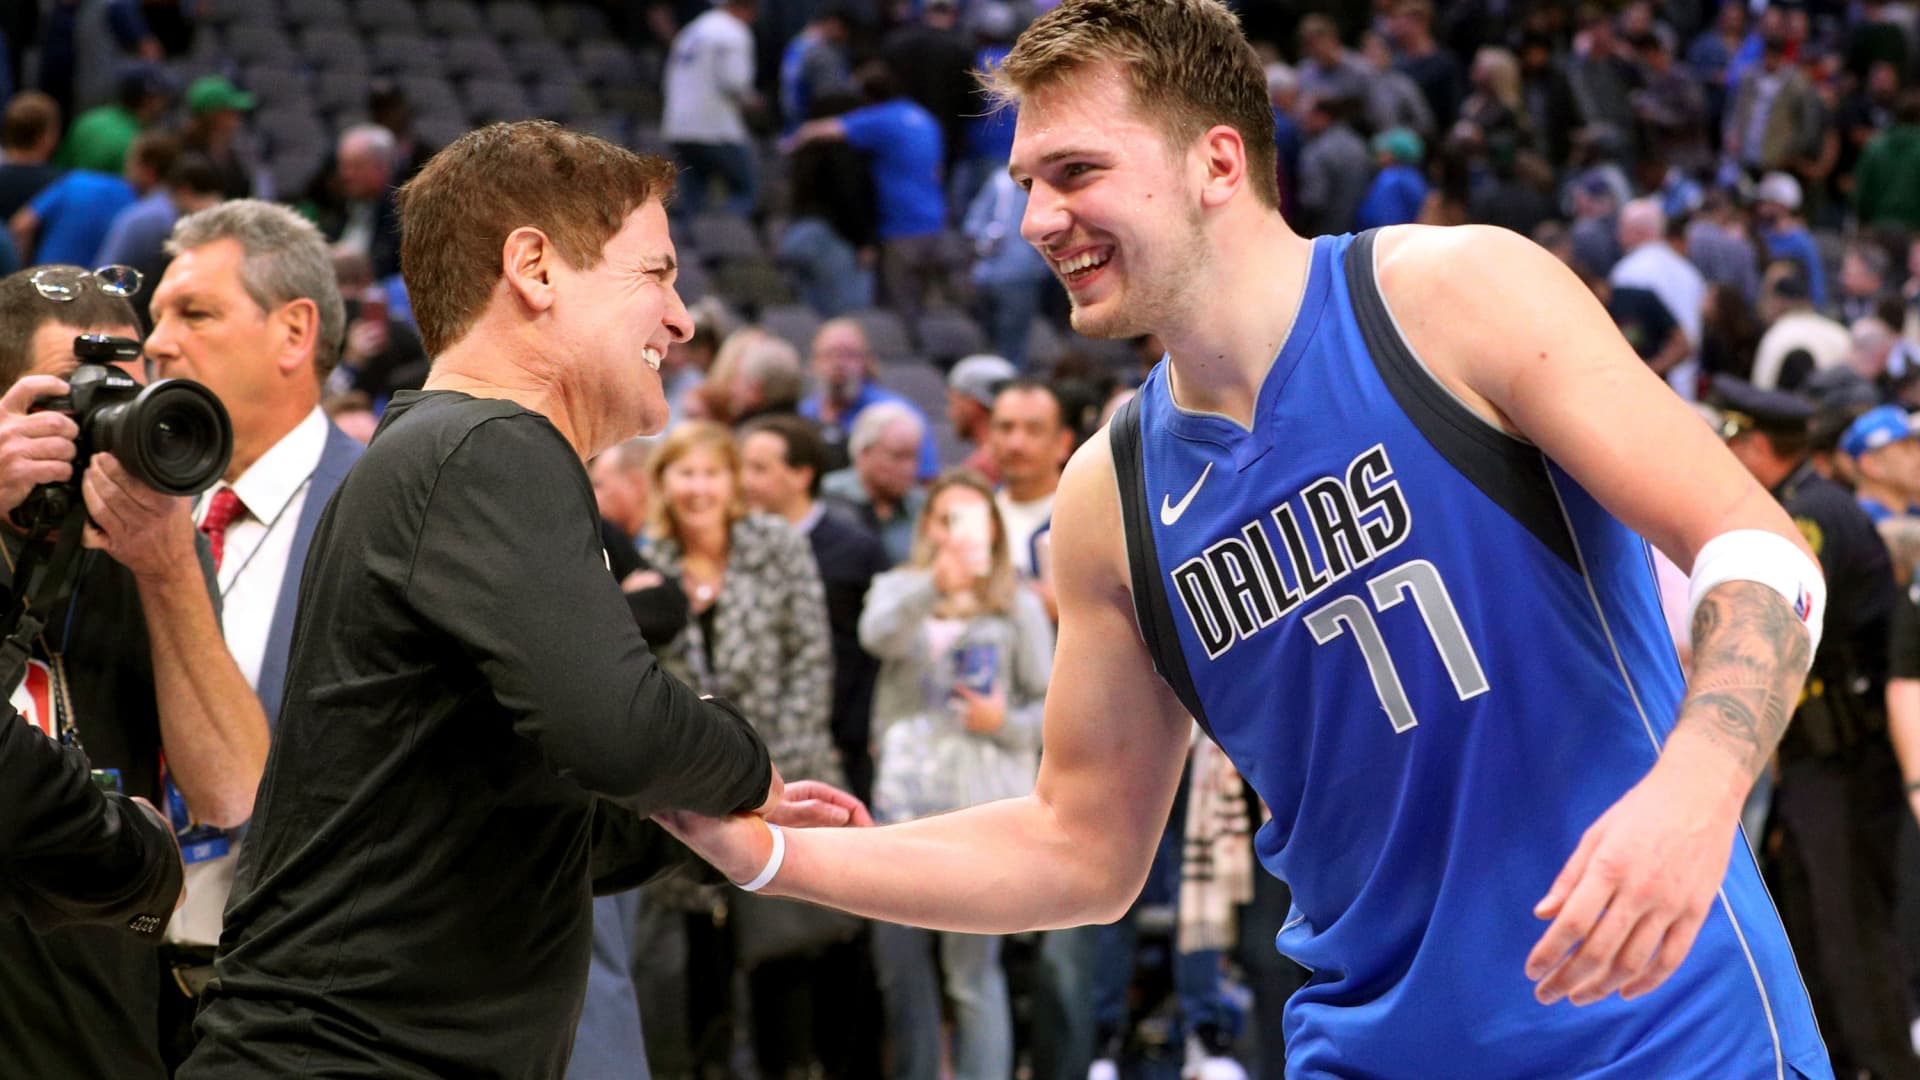 Dallas Mavericks owner Mark Cuban shakes hands with Luka Doncic (77) after the 117-110 win over the San Antonio Spurs in an NBA basketball game Monday, Nov. 18, 2019, in Dallas.